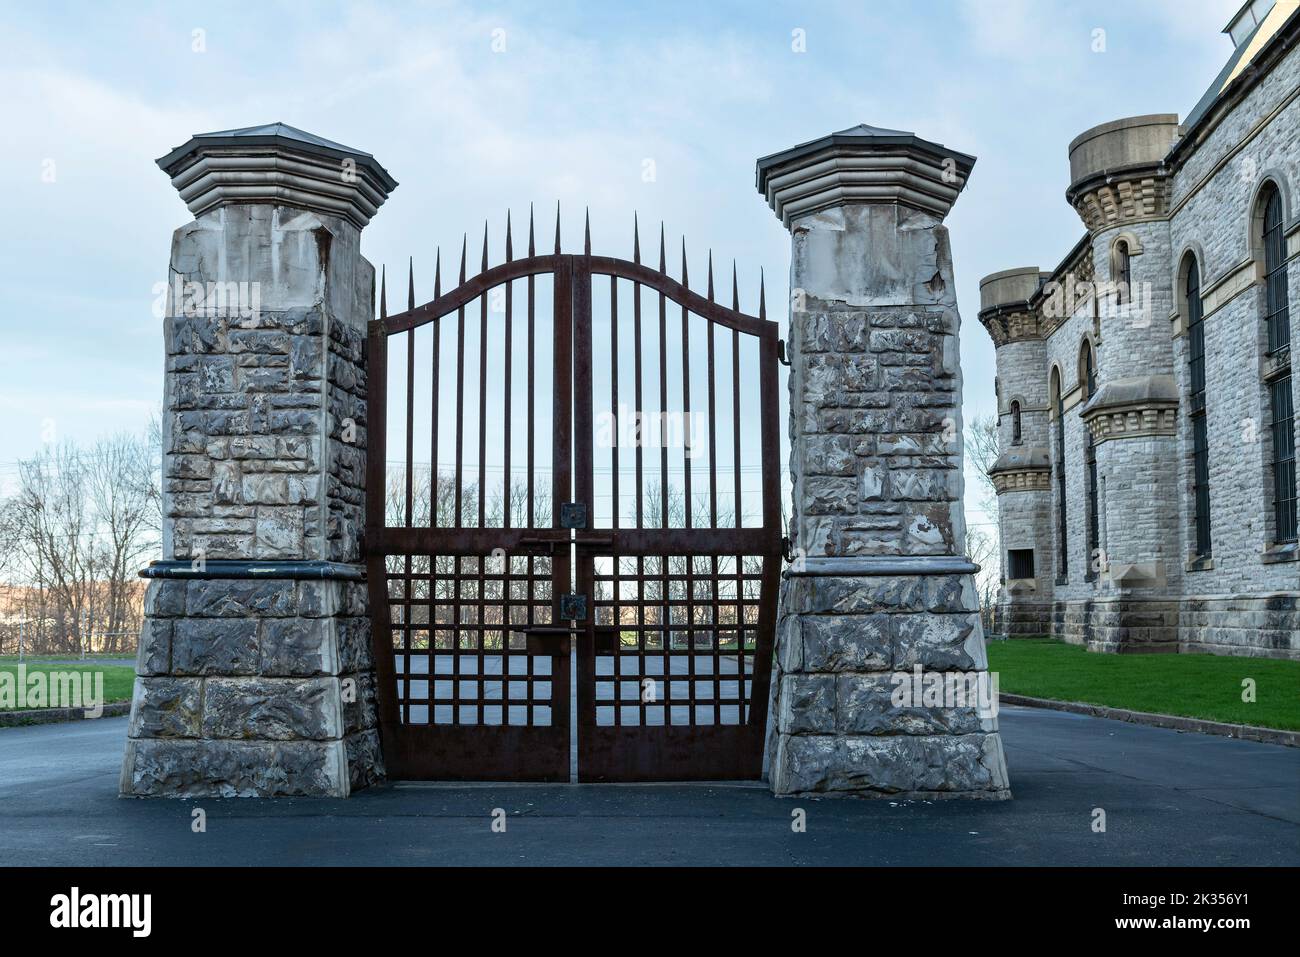 Iron gate to the Ohio State Prison located in Mansfield, Ohio Built in 1886.  Location used for filming the Shawshank Redemption. Stock Photo